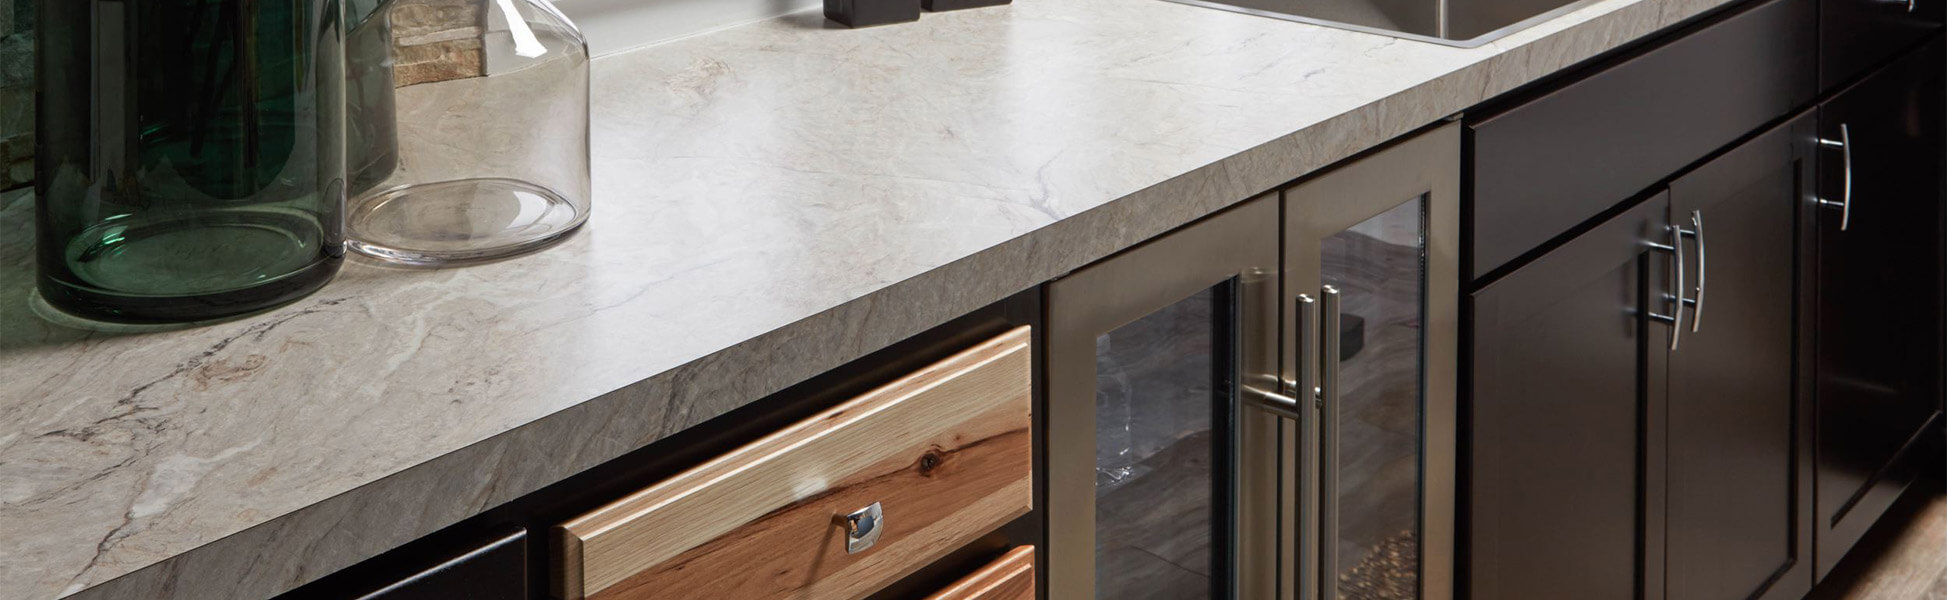 CNC Granite Countertops for High Quality, Durable Countertops